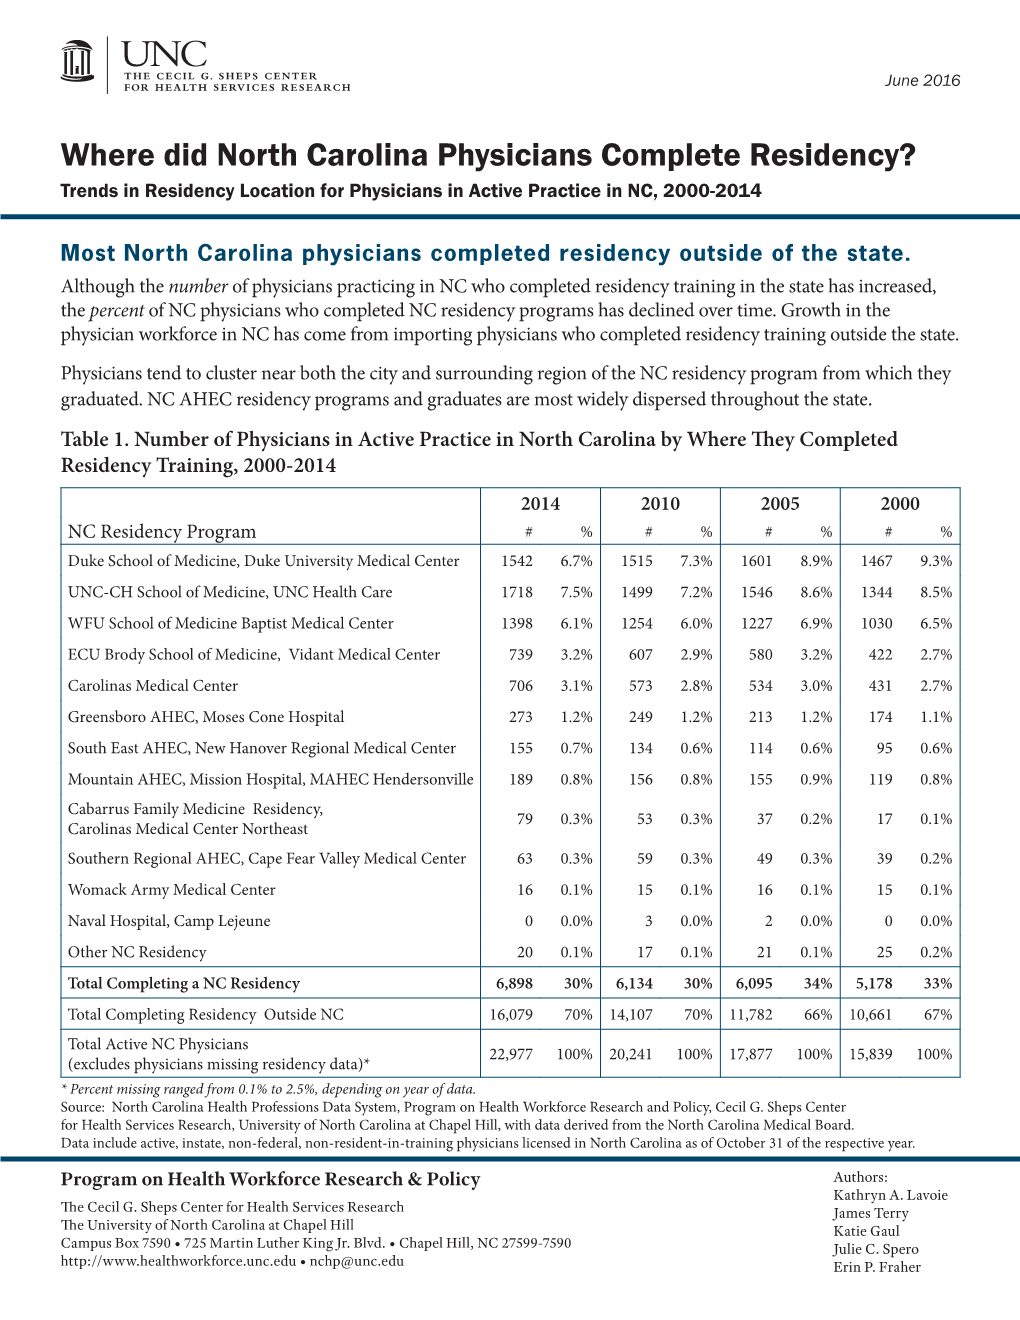 Where Did North Carolina Physicians Complete Residency? Trends in Residency Location for Physicians in Active Practice in NC, 2000-2014